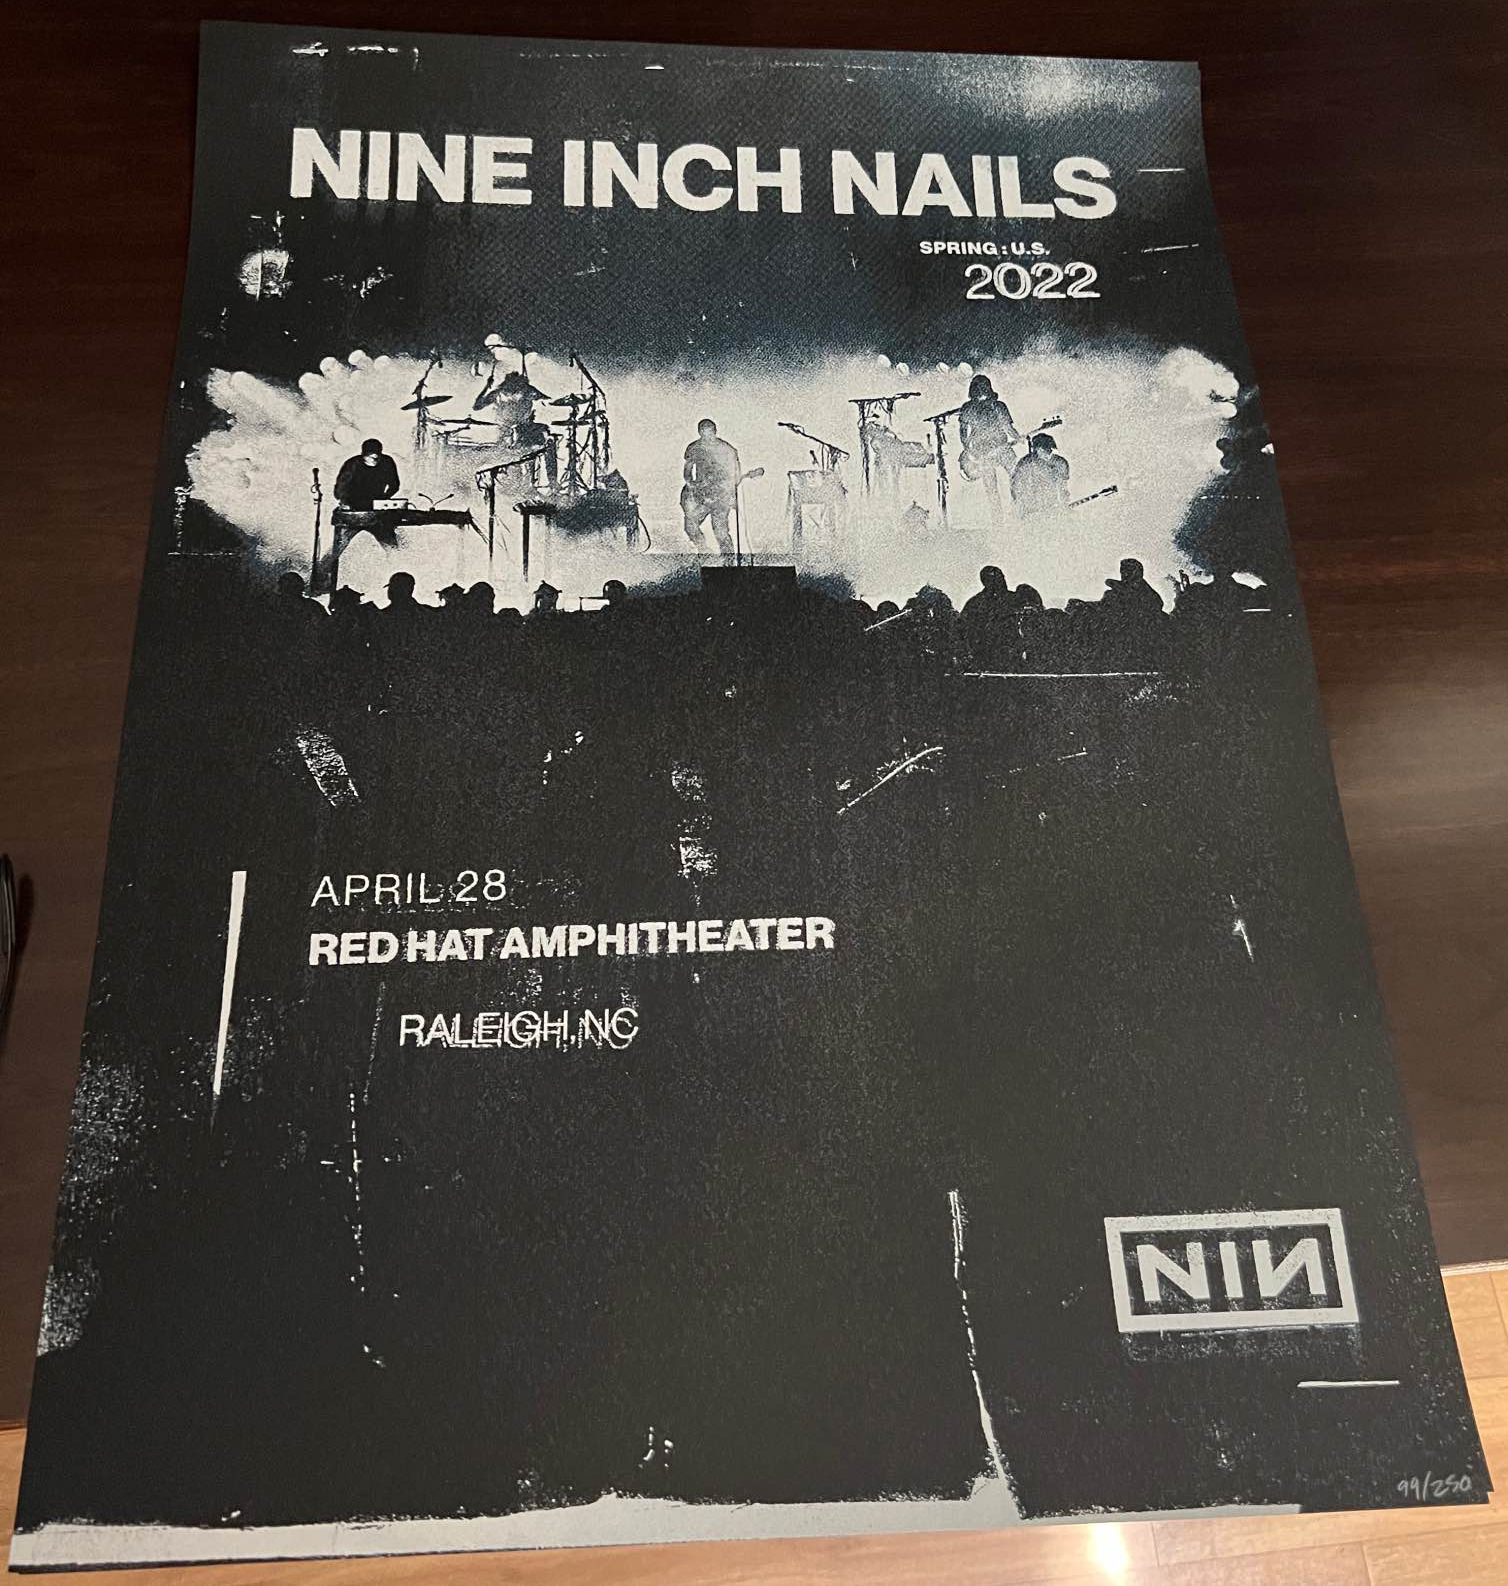 <a href='https://www.ebay.com/sch/i.html?_from=R40&_trksid=p2323012.m570.l1313&_nkw=Nine+Inch+Nails+Poster+Raleigh&_sacat=0&mkcid=1&mkrid=711-53200-19255-0&siteid=0&campid=5336302525&customid=poster&toolid=10001&mkevt=1'>Buy this Poster!</a>